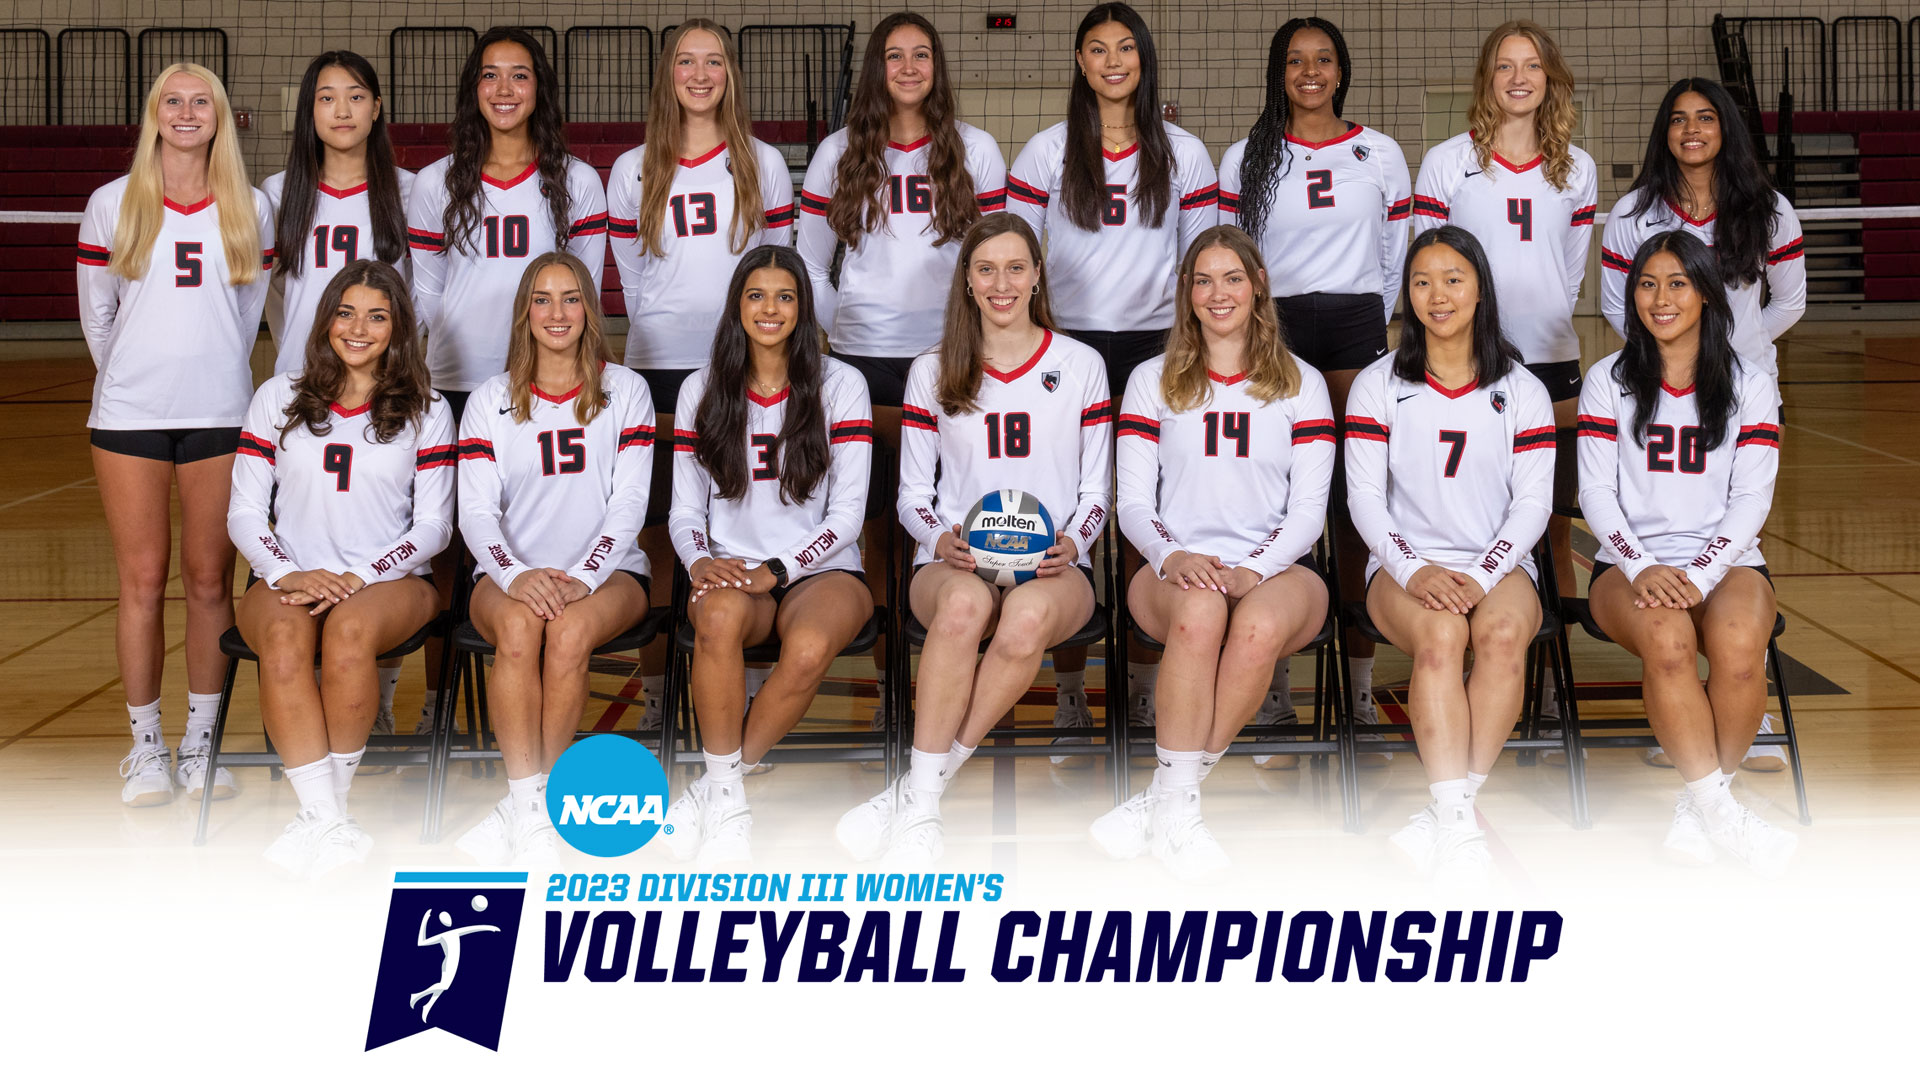 team photo of women's volleyball team wearing white uniforms and arranged in two rows with the NCAA logo reading 2023 Division III Women's Volleyball Championship